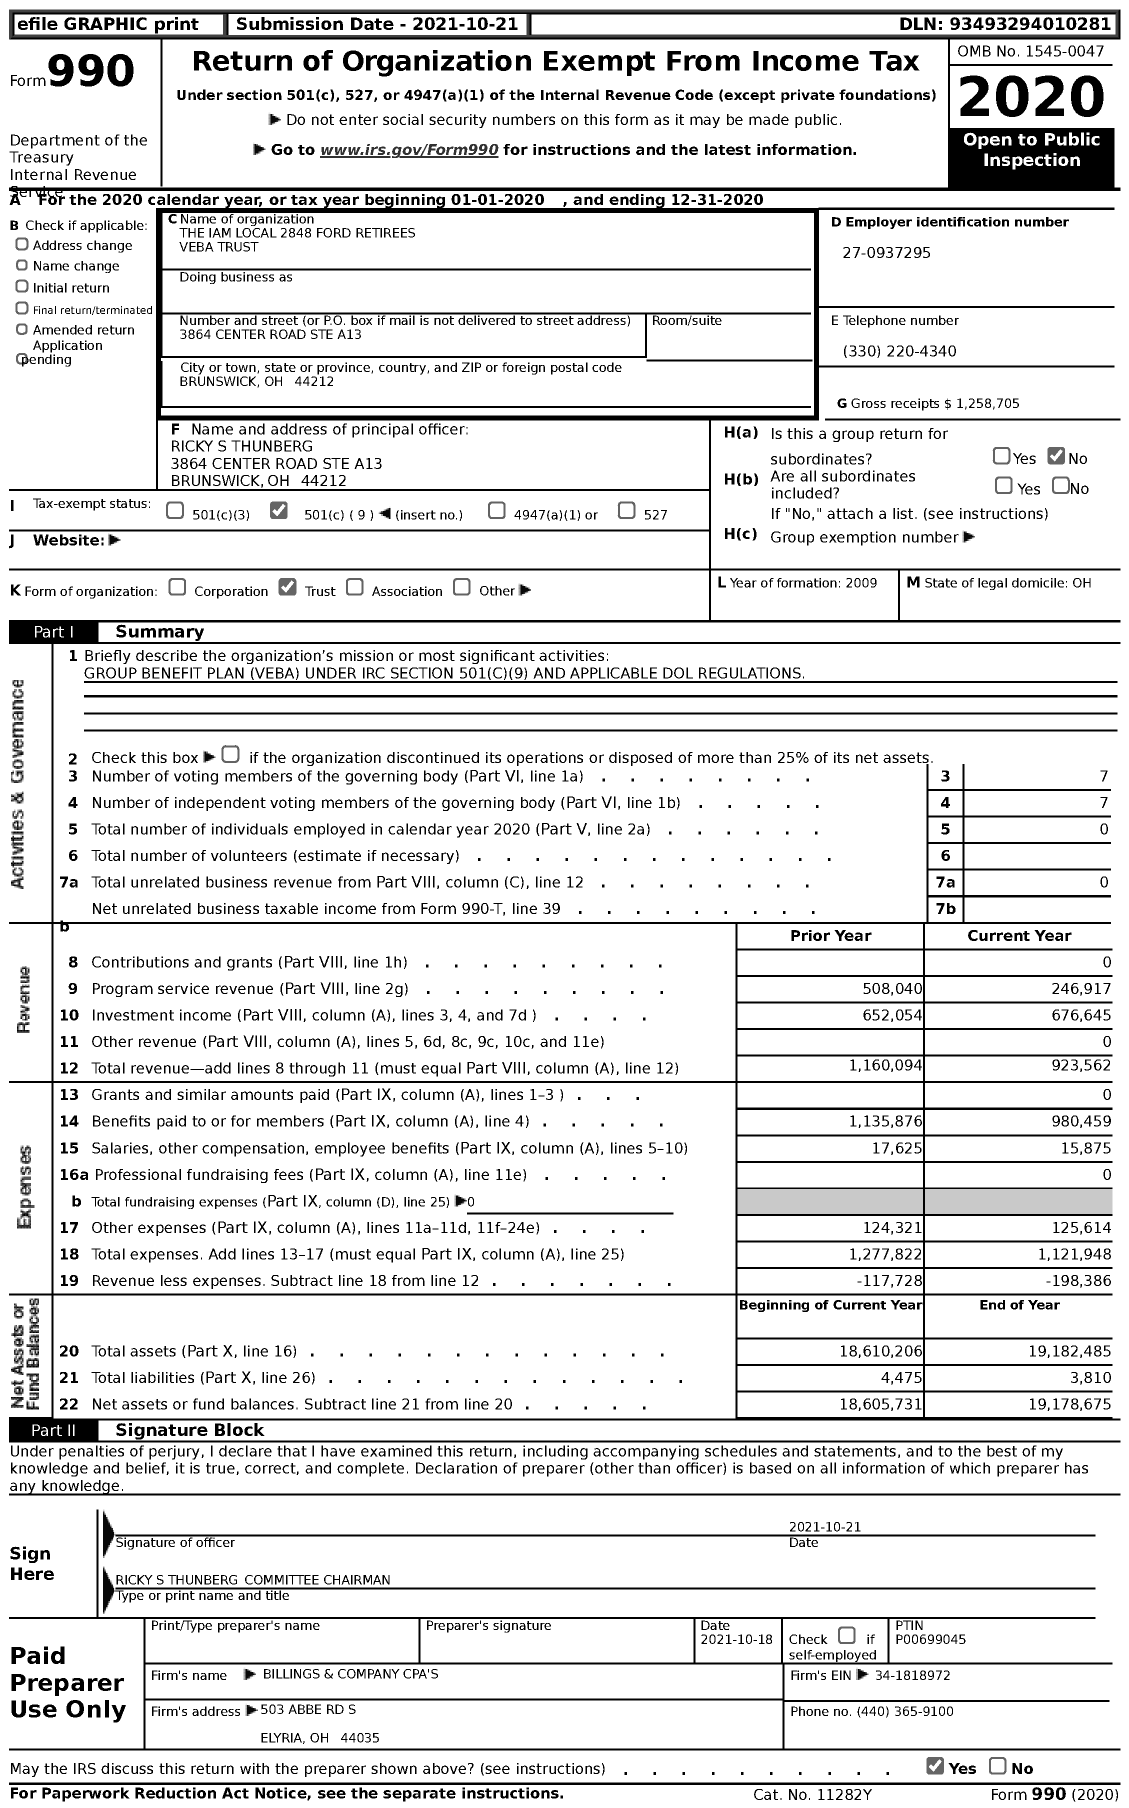 Image of first page of 2020 Form 990 for The Iam Local 2848 Ford Retirees Veba Trust